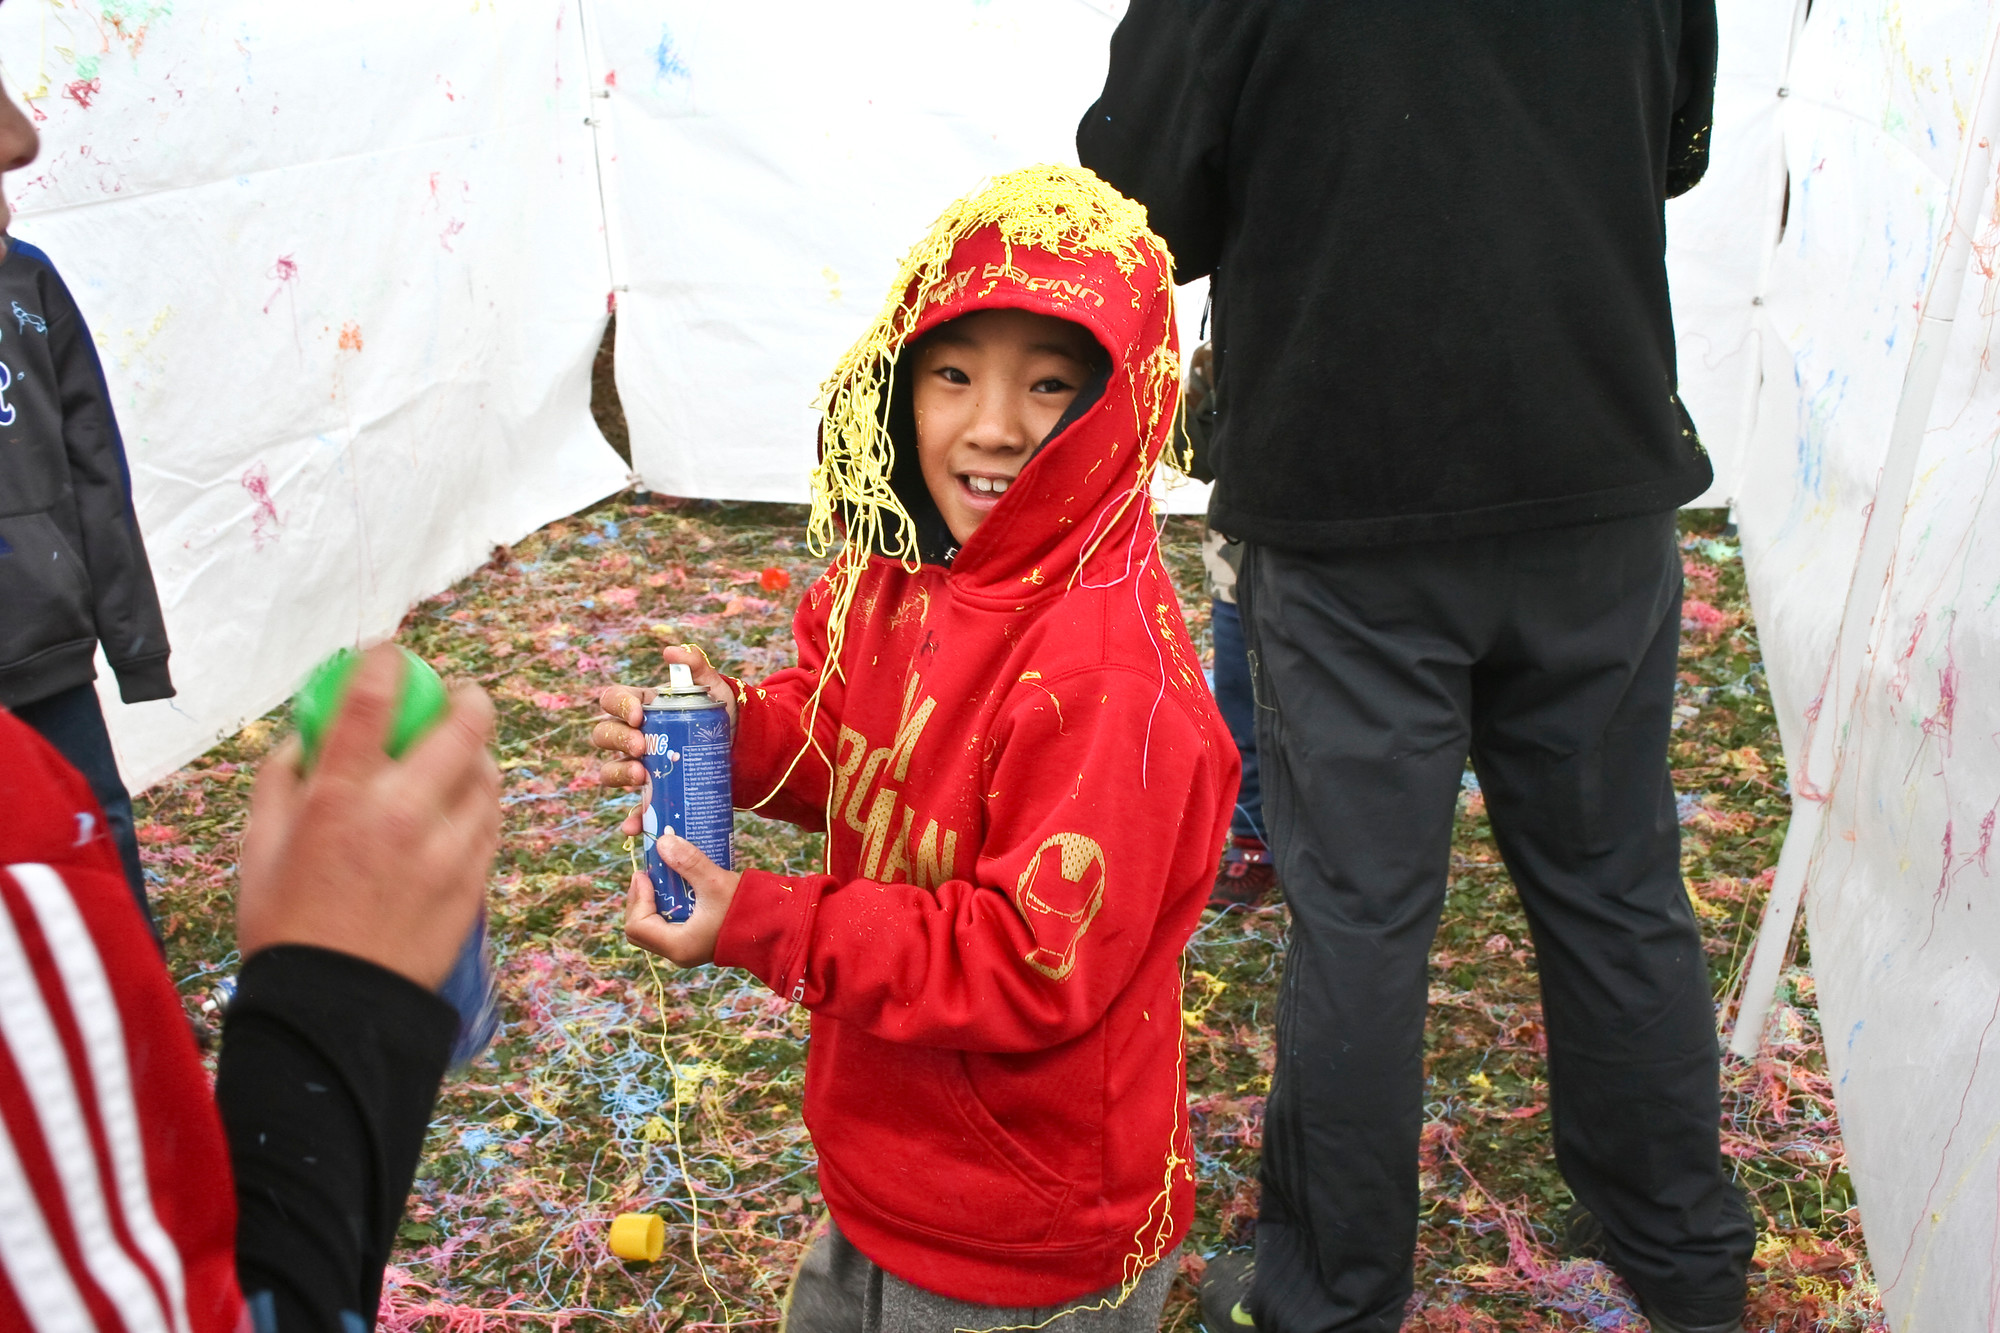 Cole Schiefelbein, 8, entered the Silly String tent at the Hewitt Fair last weekend ready to rumble. The tent was one of many activities that were open to families at the event. (Rebecca Rogak/Herald)